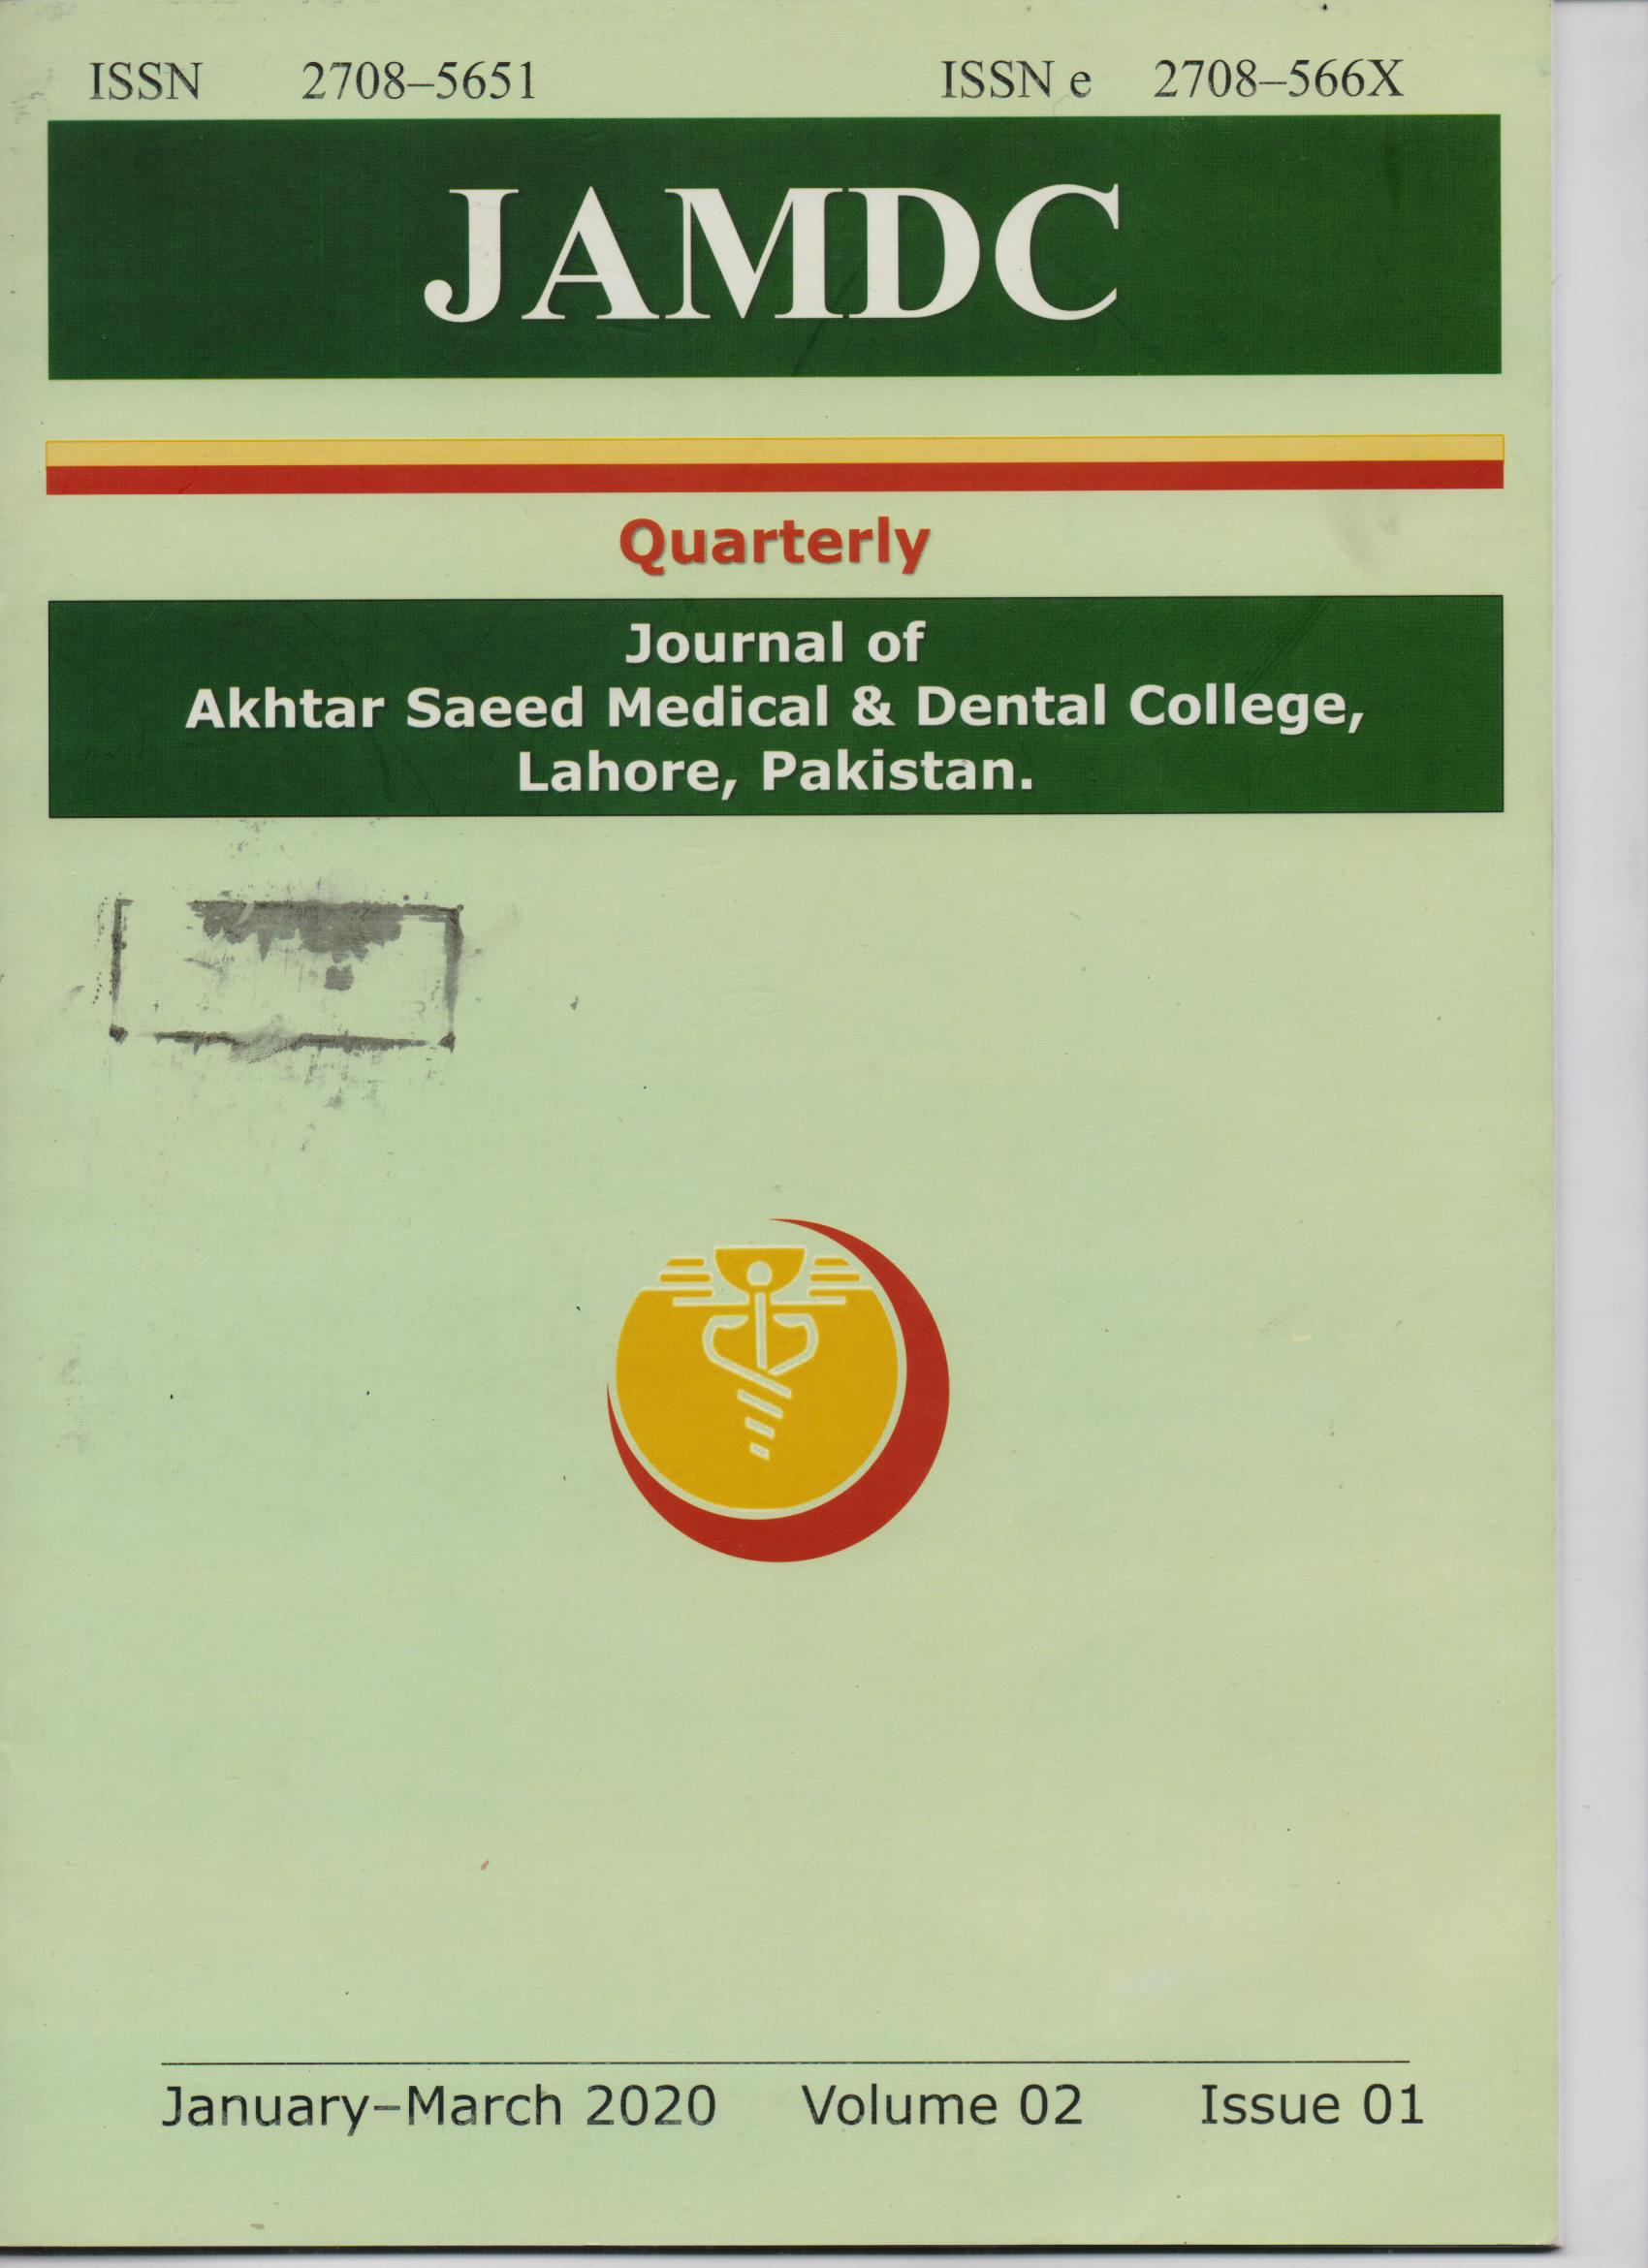 Journal of Akhtar Saeed Medical & Dental College, Lahore